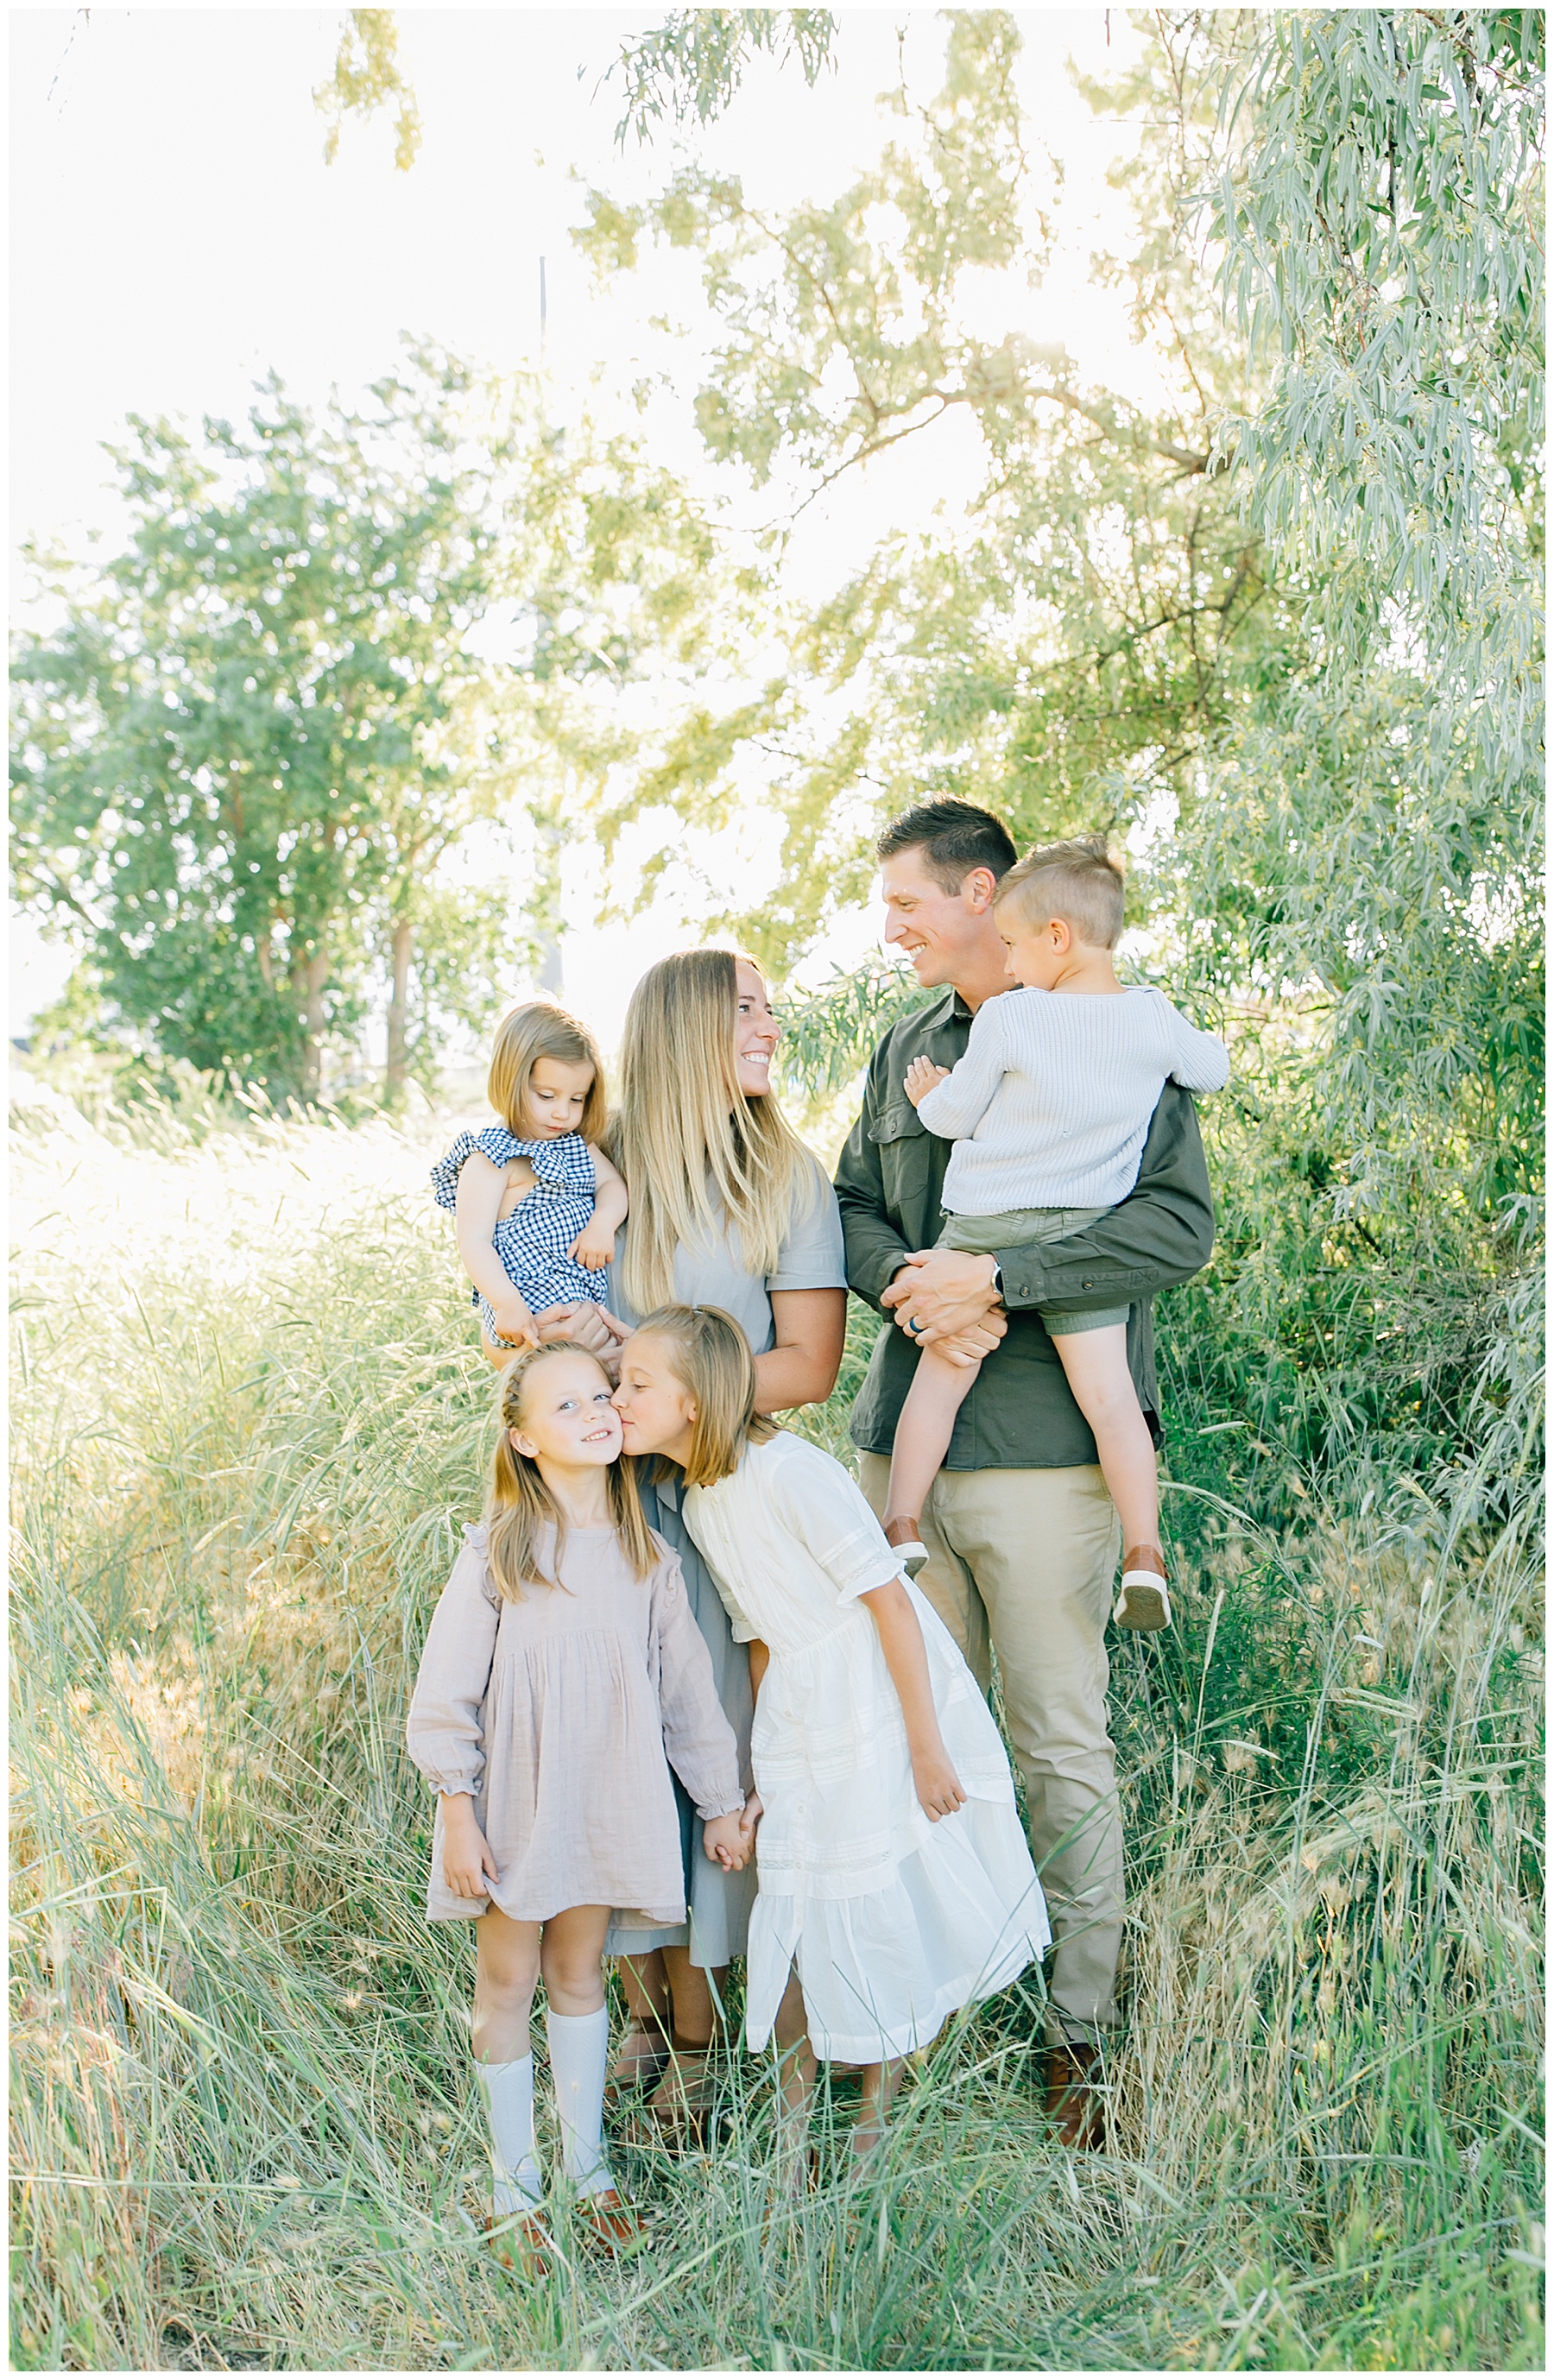 What to Wear for Family Pictures | Summer